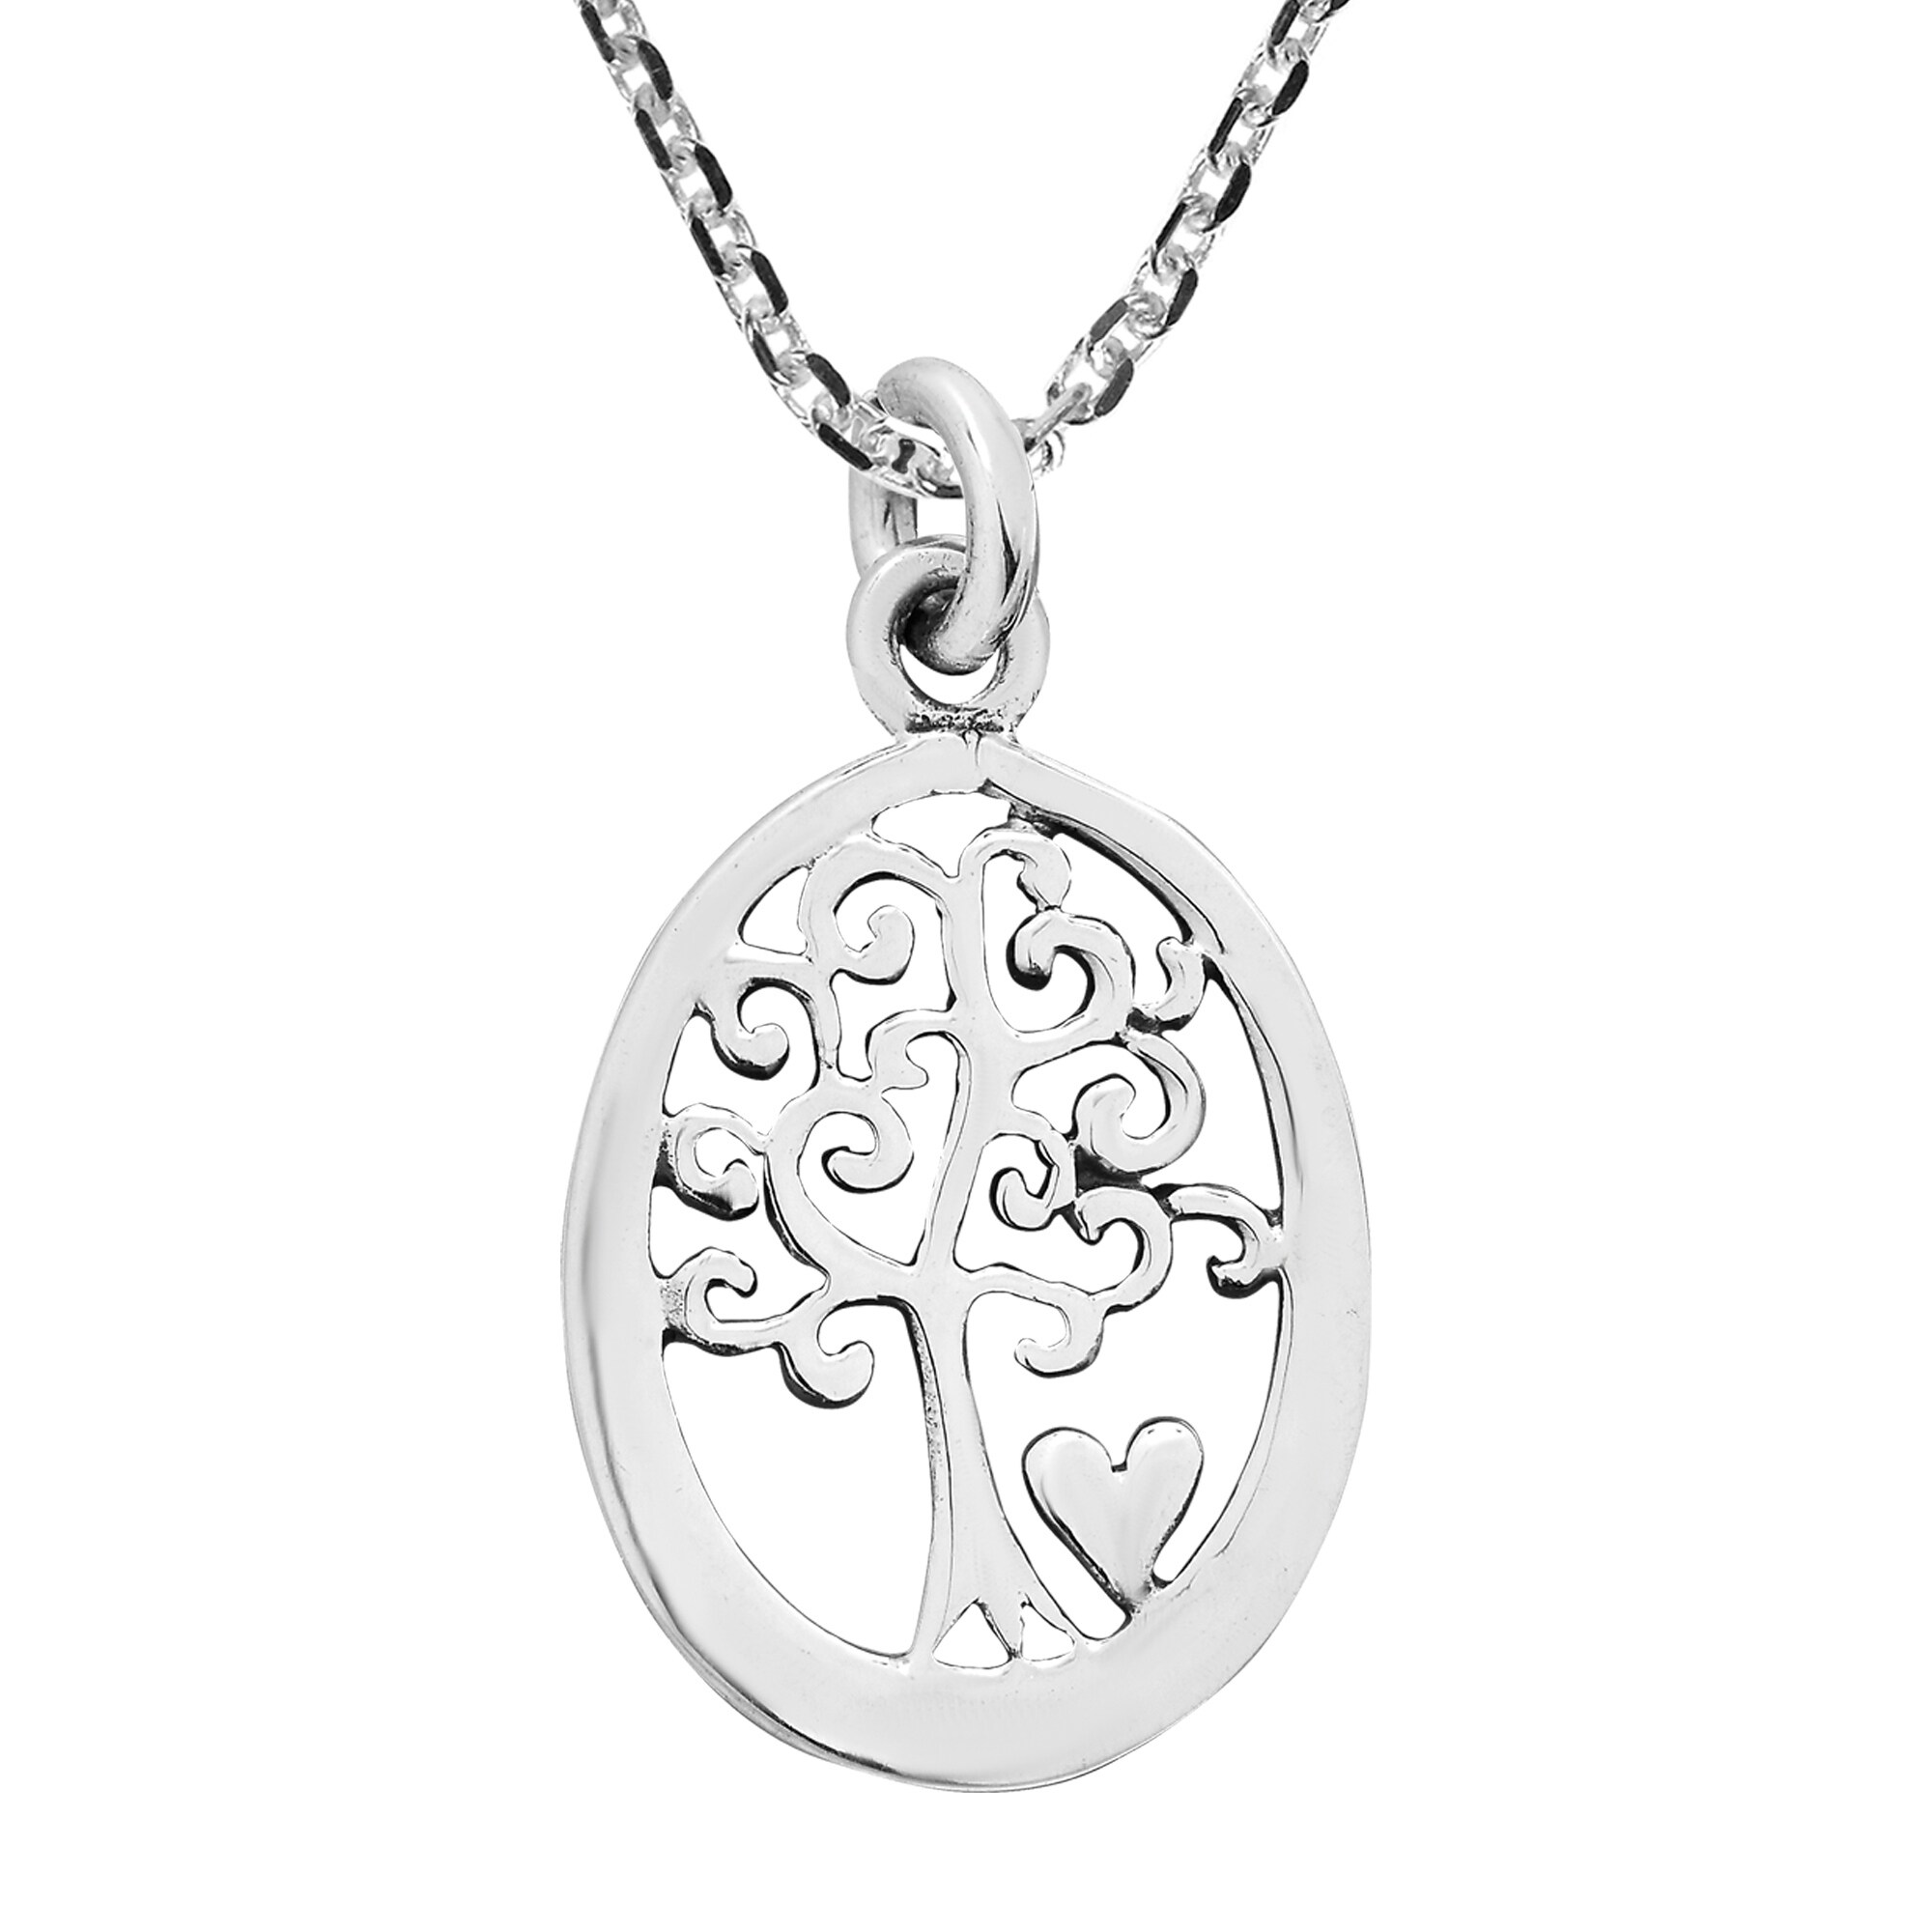 925 Sterling Silver Tree of Life Pendant Necklace Gift Idea NEW Design